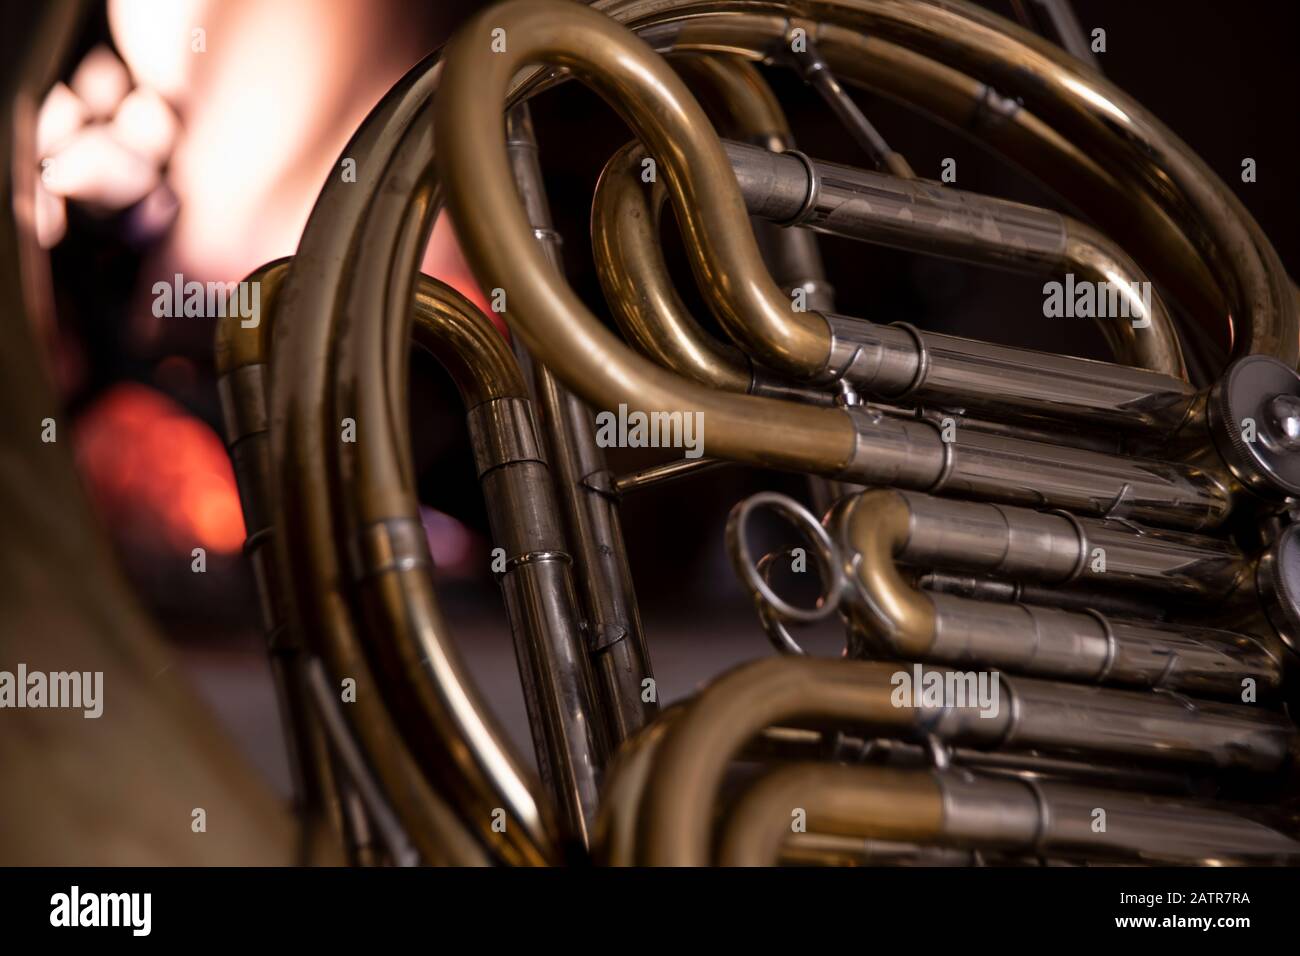 Closeup detail of a brass French horn with the coiled tubing and valve ...